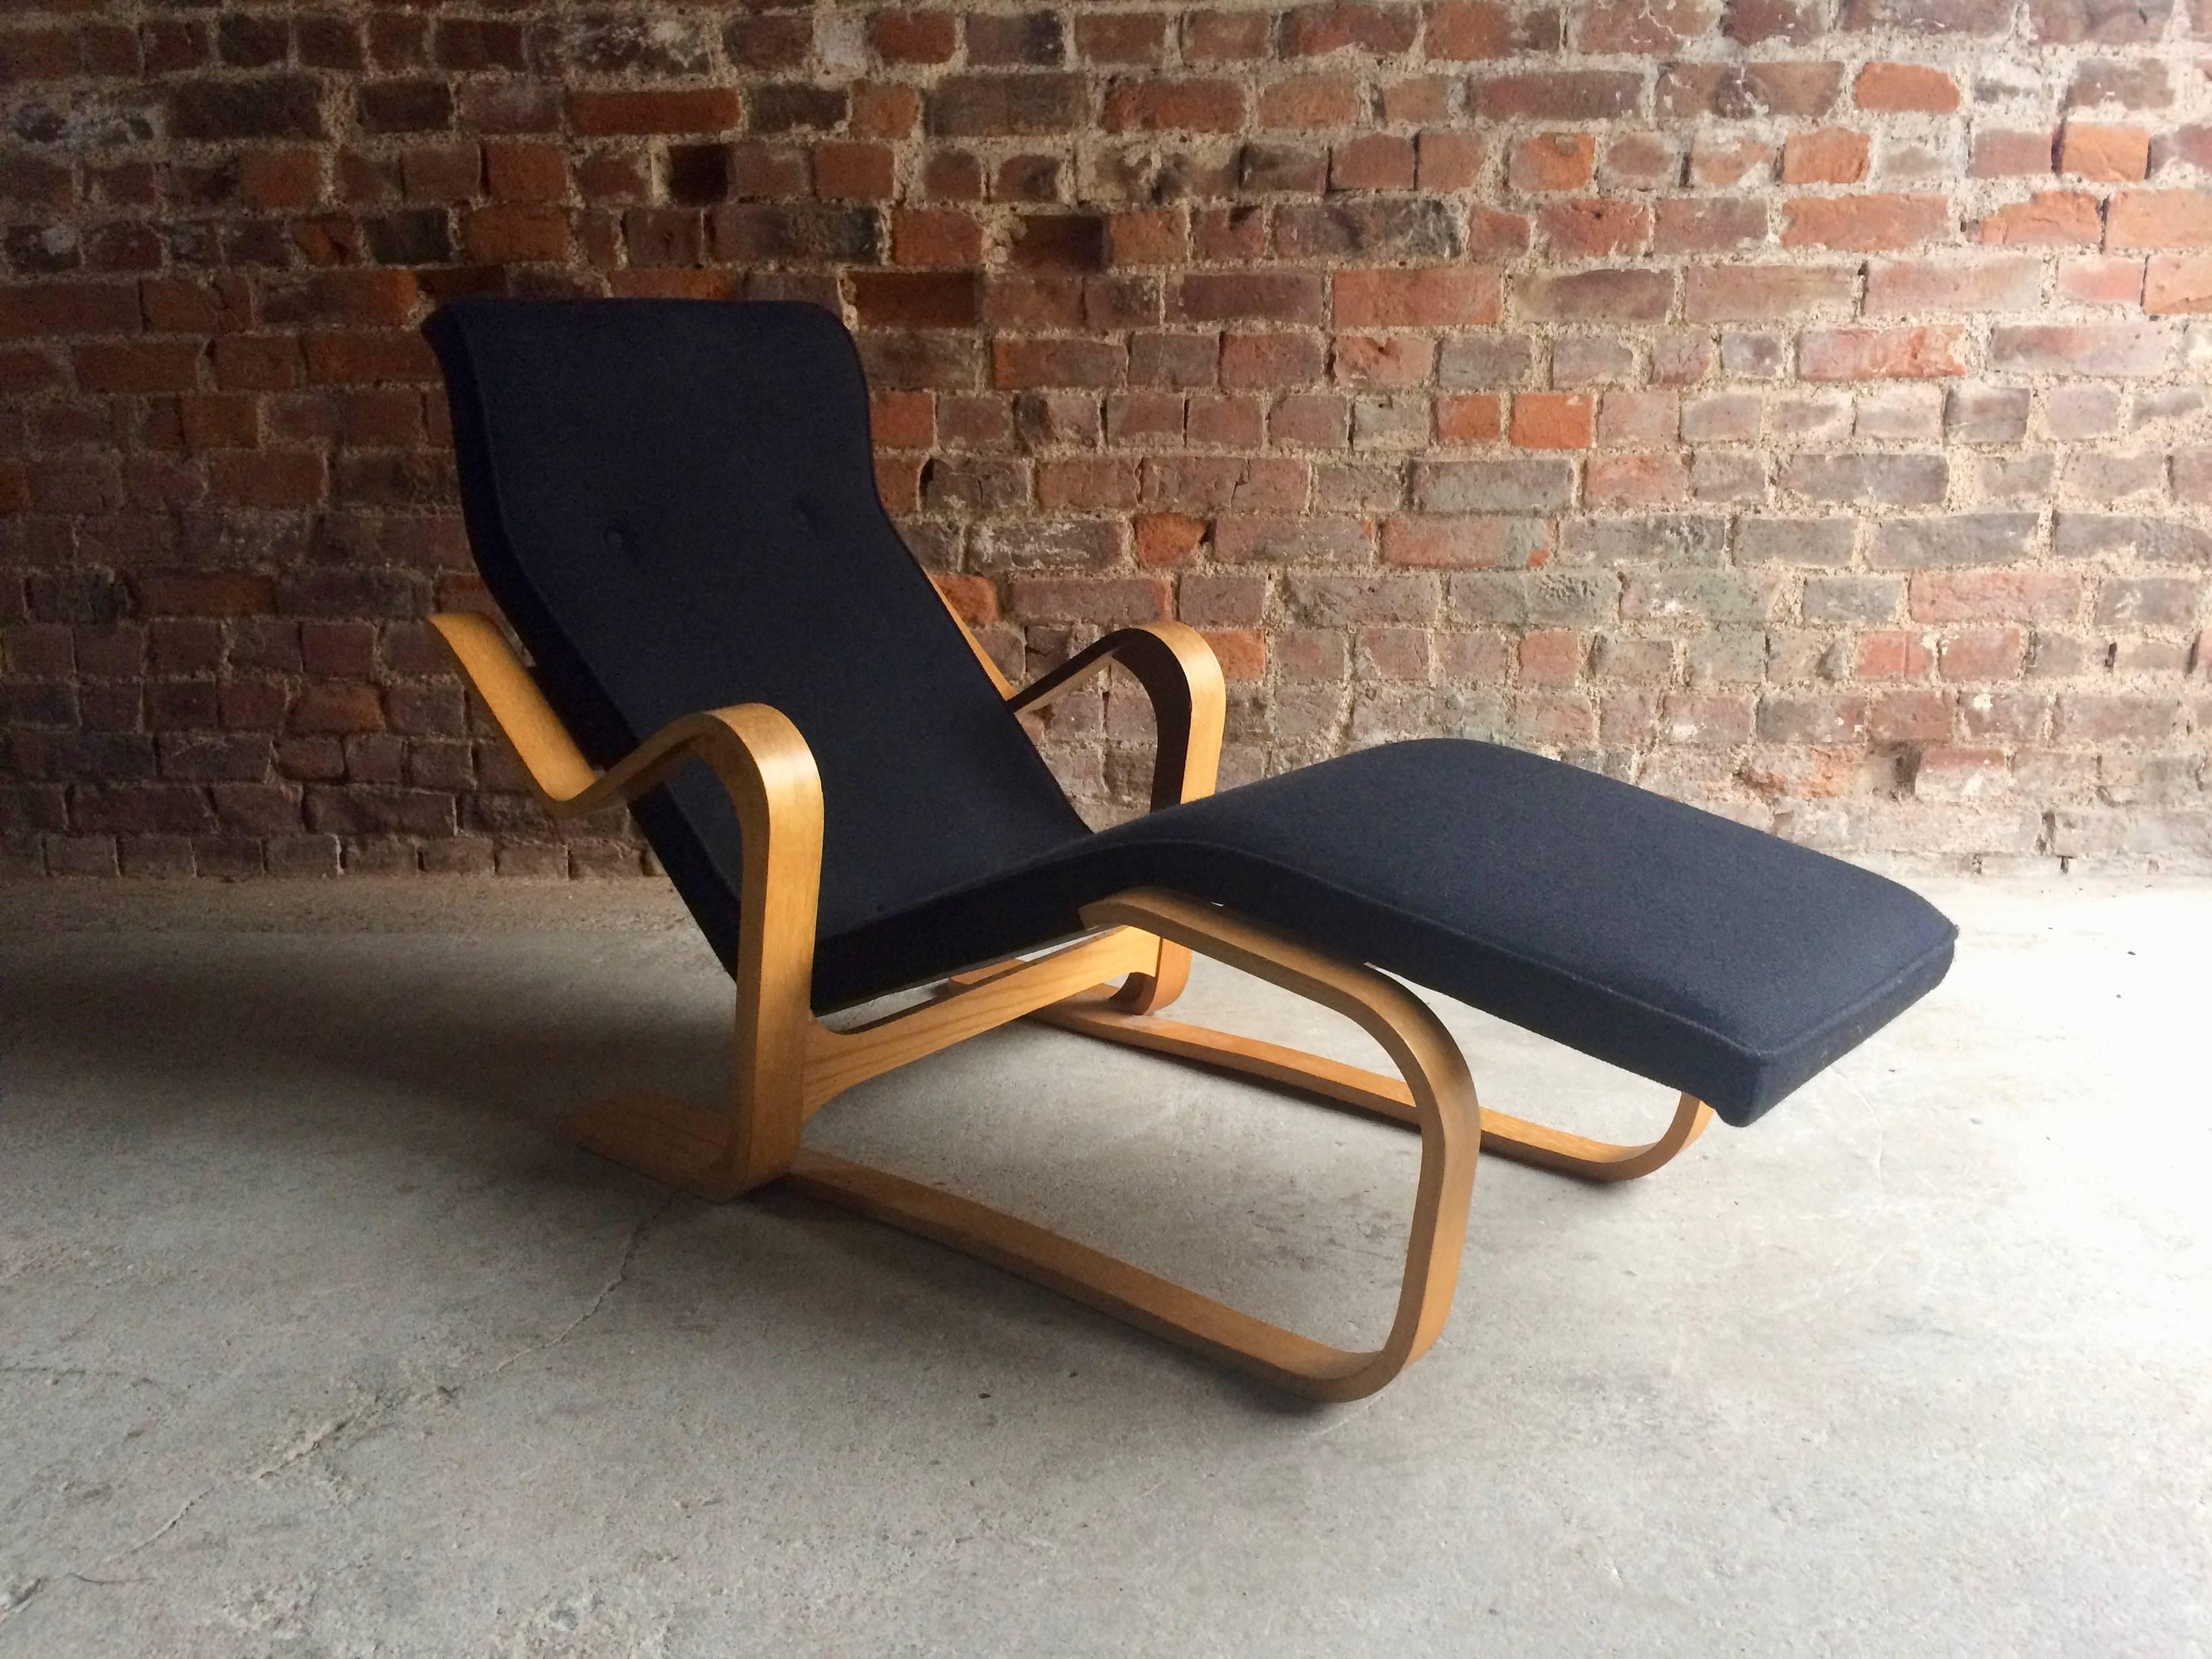 Original Marcel Breuer bent ply 'Long Chair' with black seat pad, circa 1970s, the ‘Long chair’, with its bent frame of laminated birch wood supporting the shaped timber seat and back, was developed soon after Marcel Breuer settled in England in